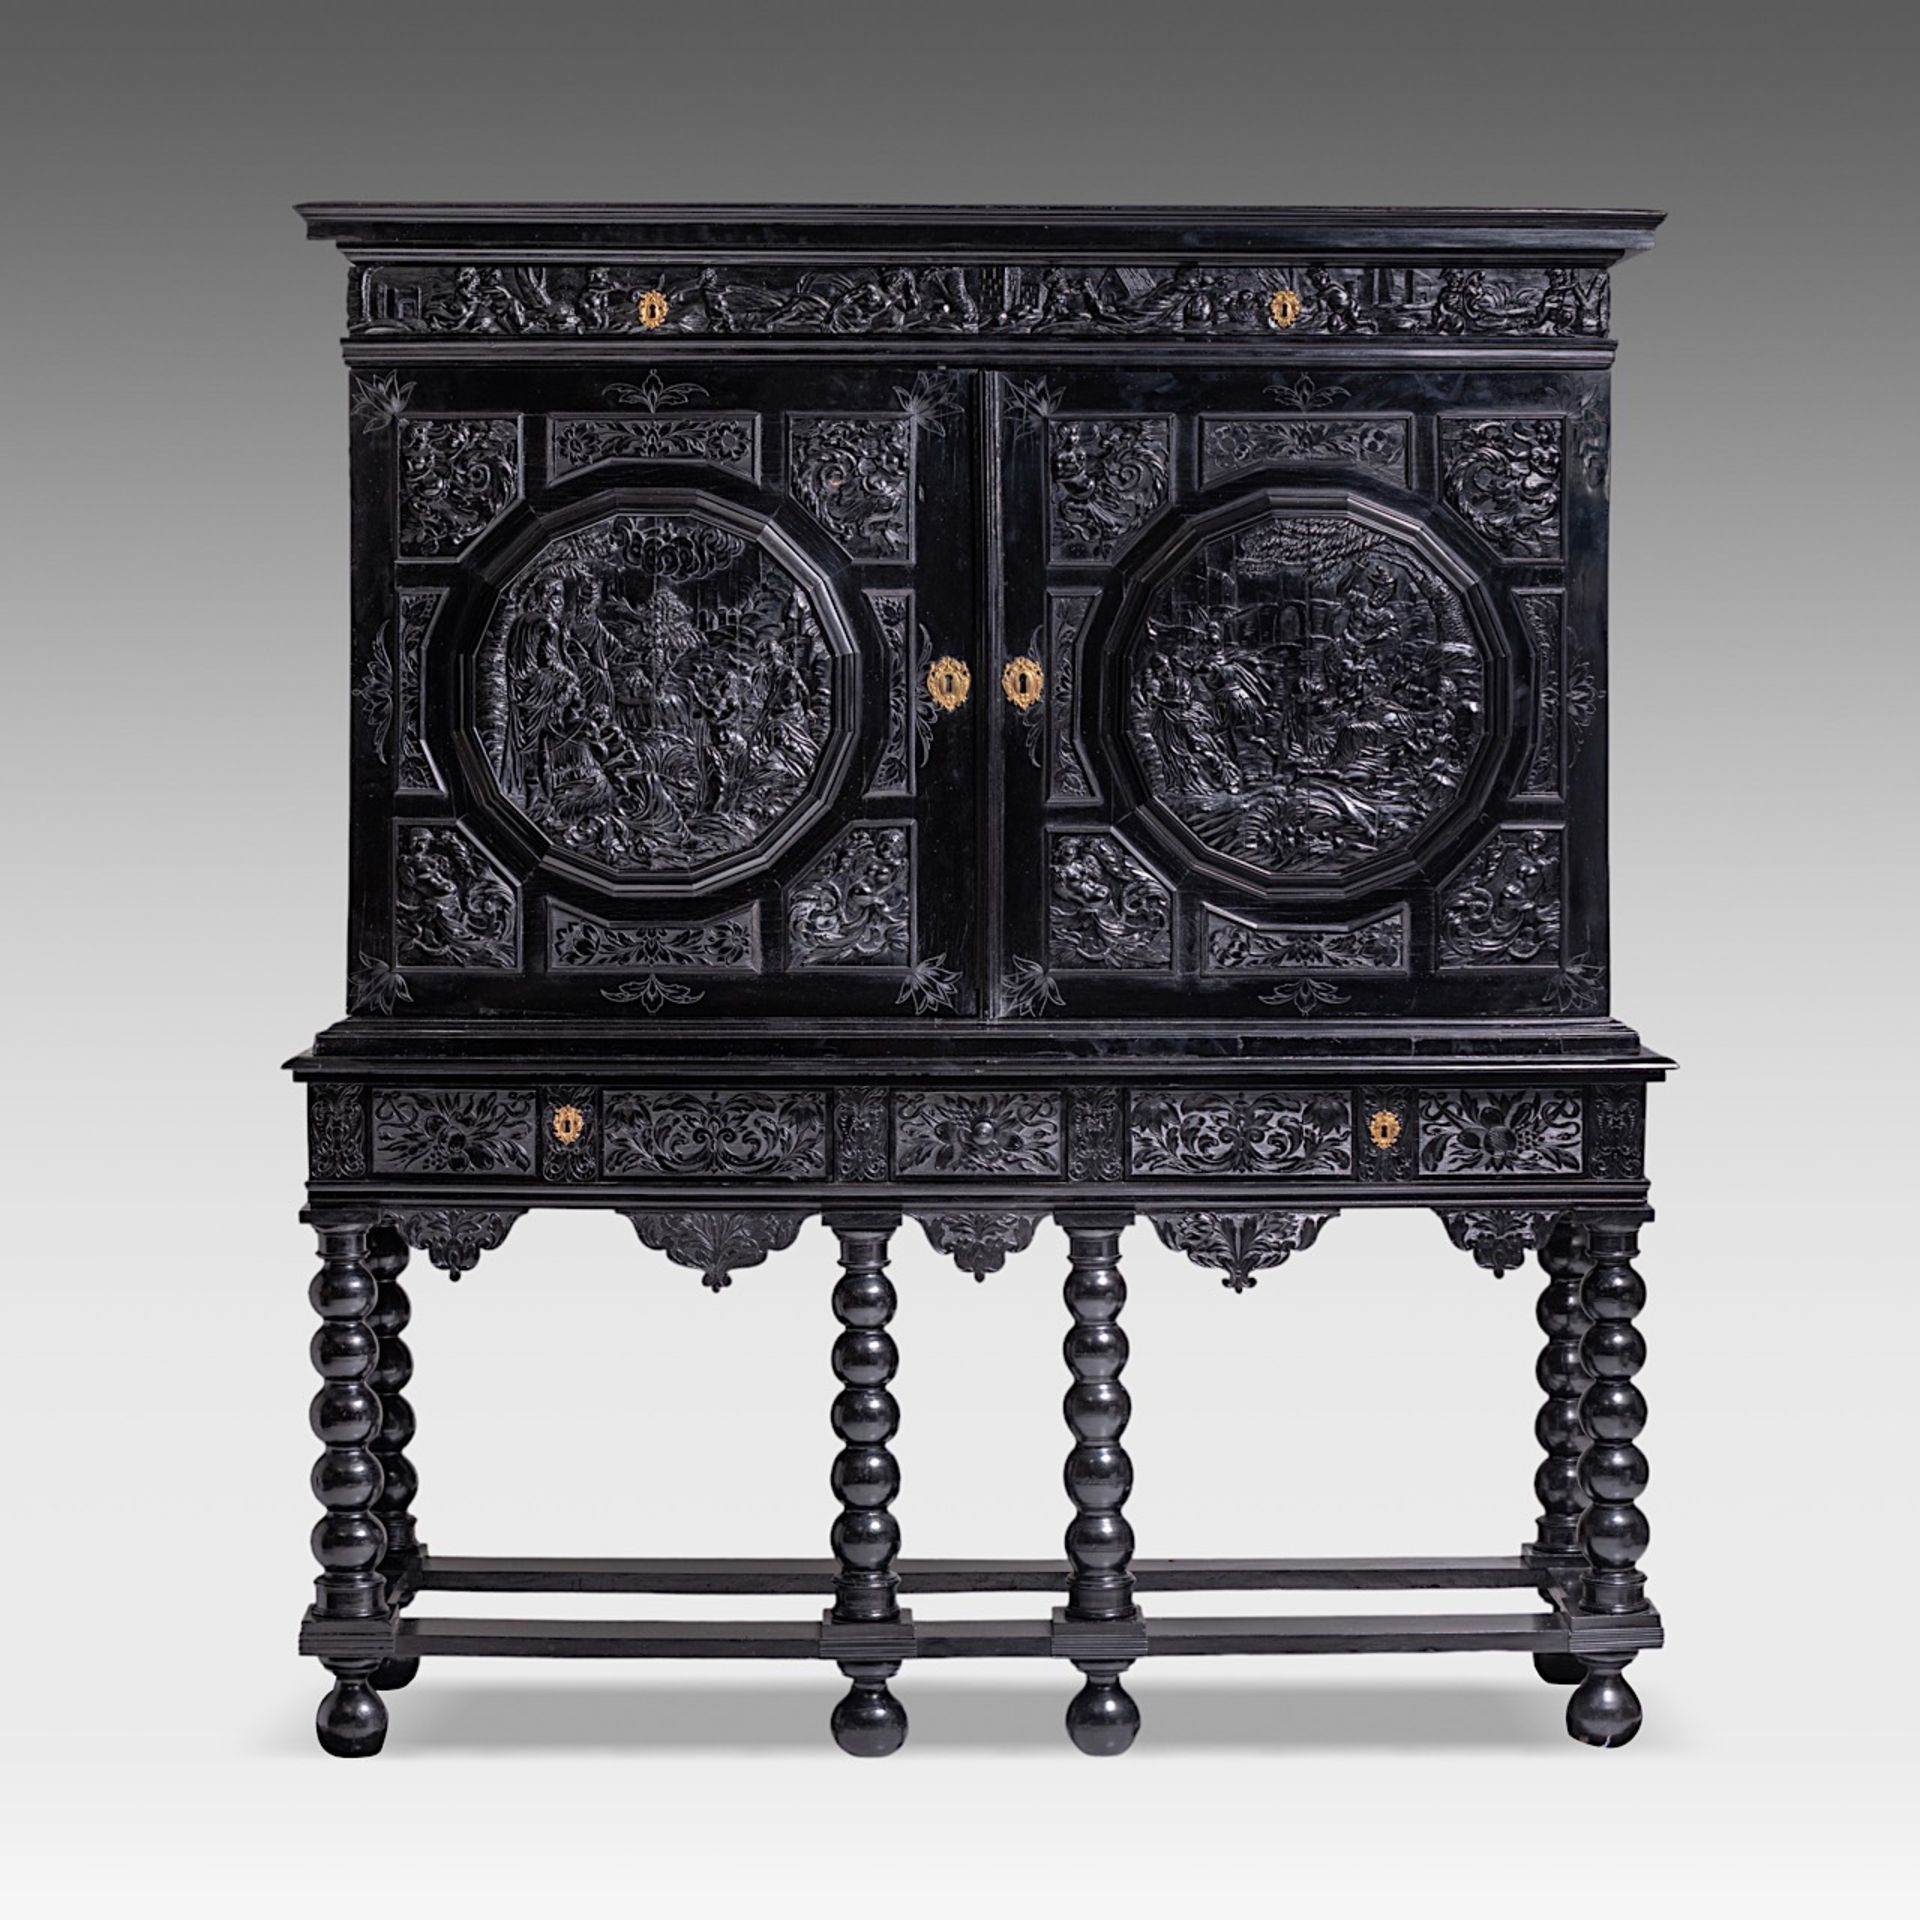 PREMIUM LOT - An exceptional 17thC French ebony and ebonised cabinet-on-stand, H 181,5 - W 163 - D 5 - Bild 3 aus 14